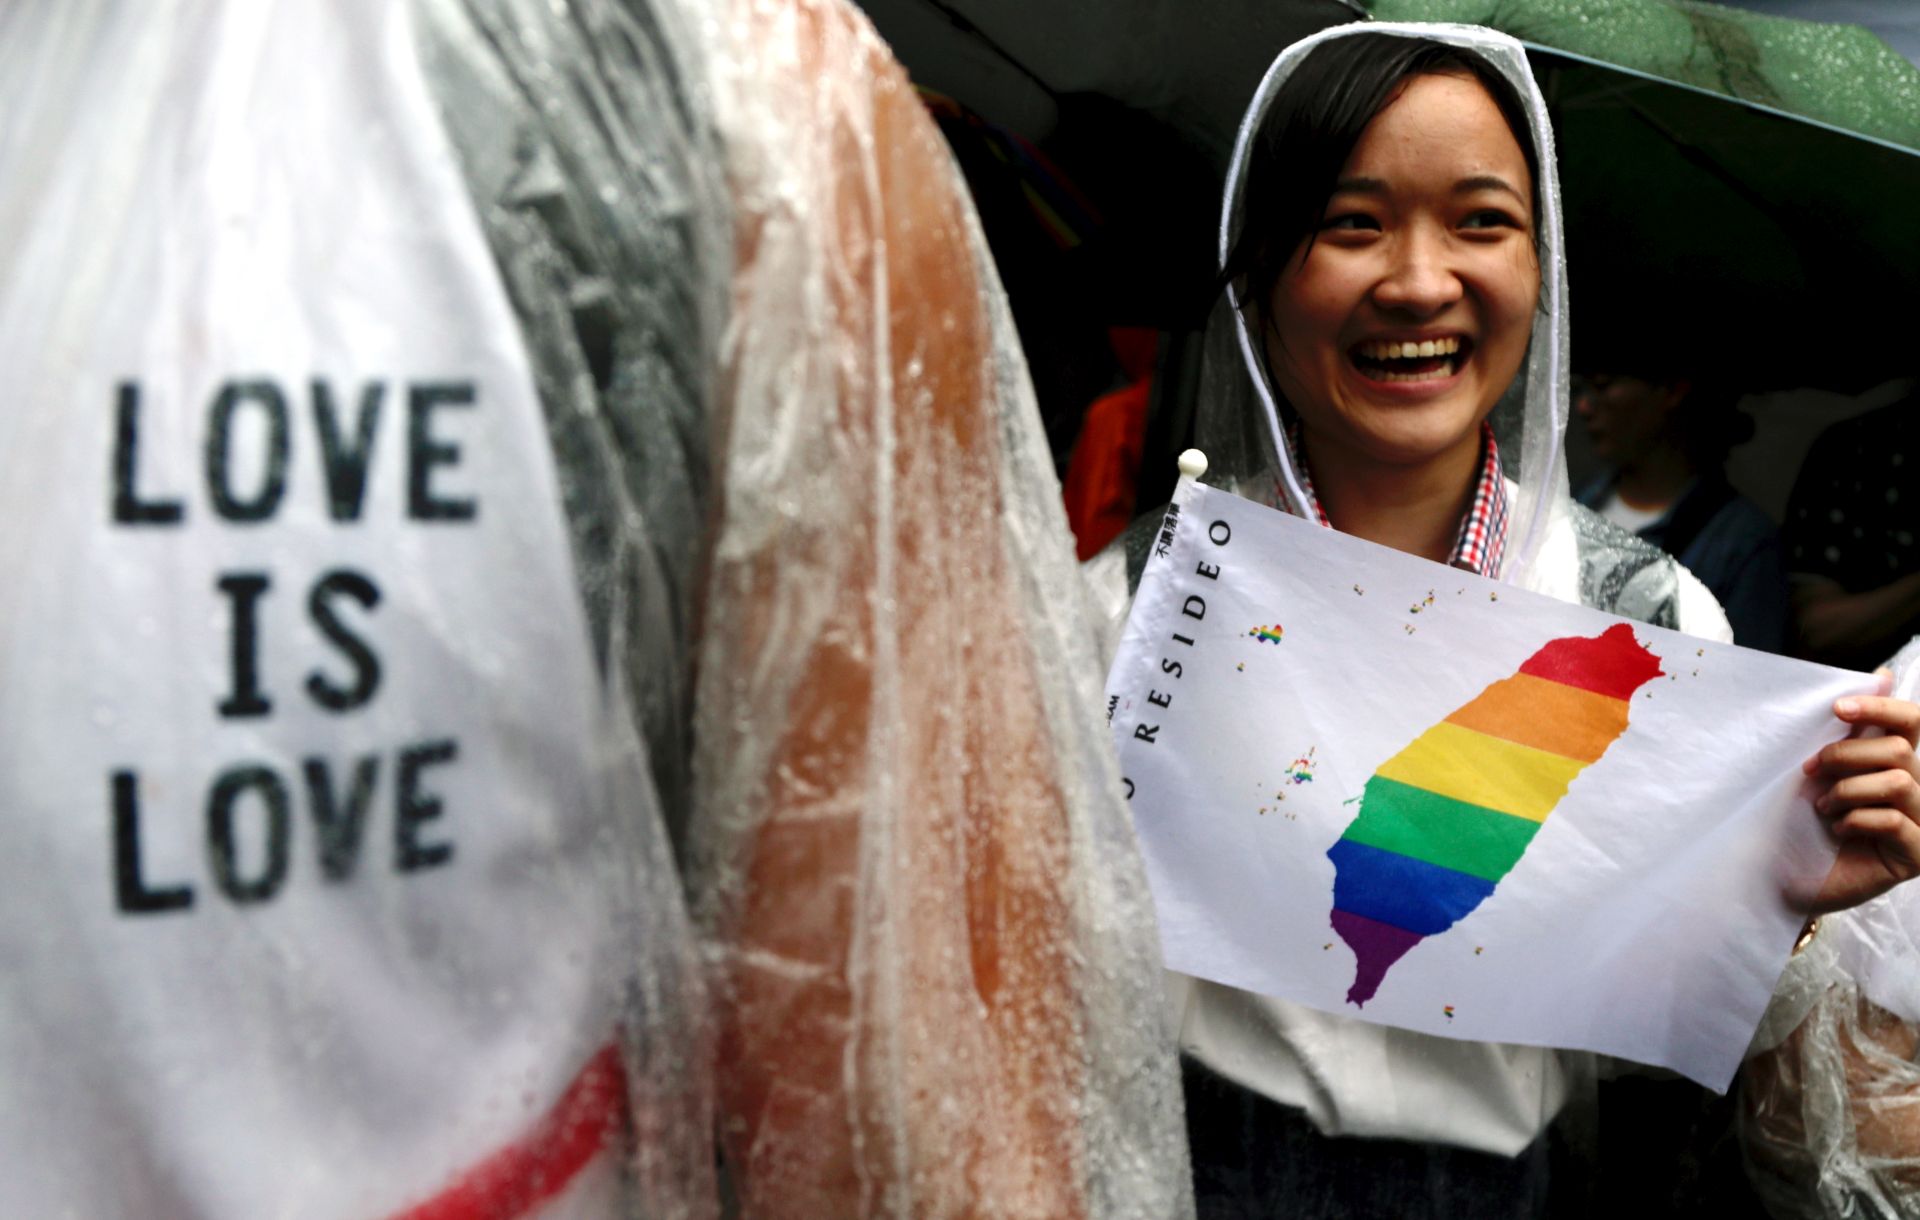 epa07577473 Supporters of same-sex marriage gather outside the parliament building as a bill for marriage equality is debated by parliamentarians in Taipei, Taiwan, 17 May 2019. According to news reports, on 24 May, Taiwan could become the first Asian country to legalize same-sex marriage. So far nearly 300 gay and lesbian couples have applied to register for legal union on the day the bill is to come into effect.  EPA/RITCHIE B. TONGO